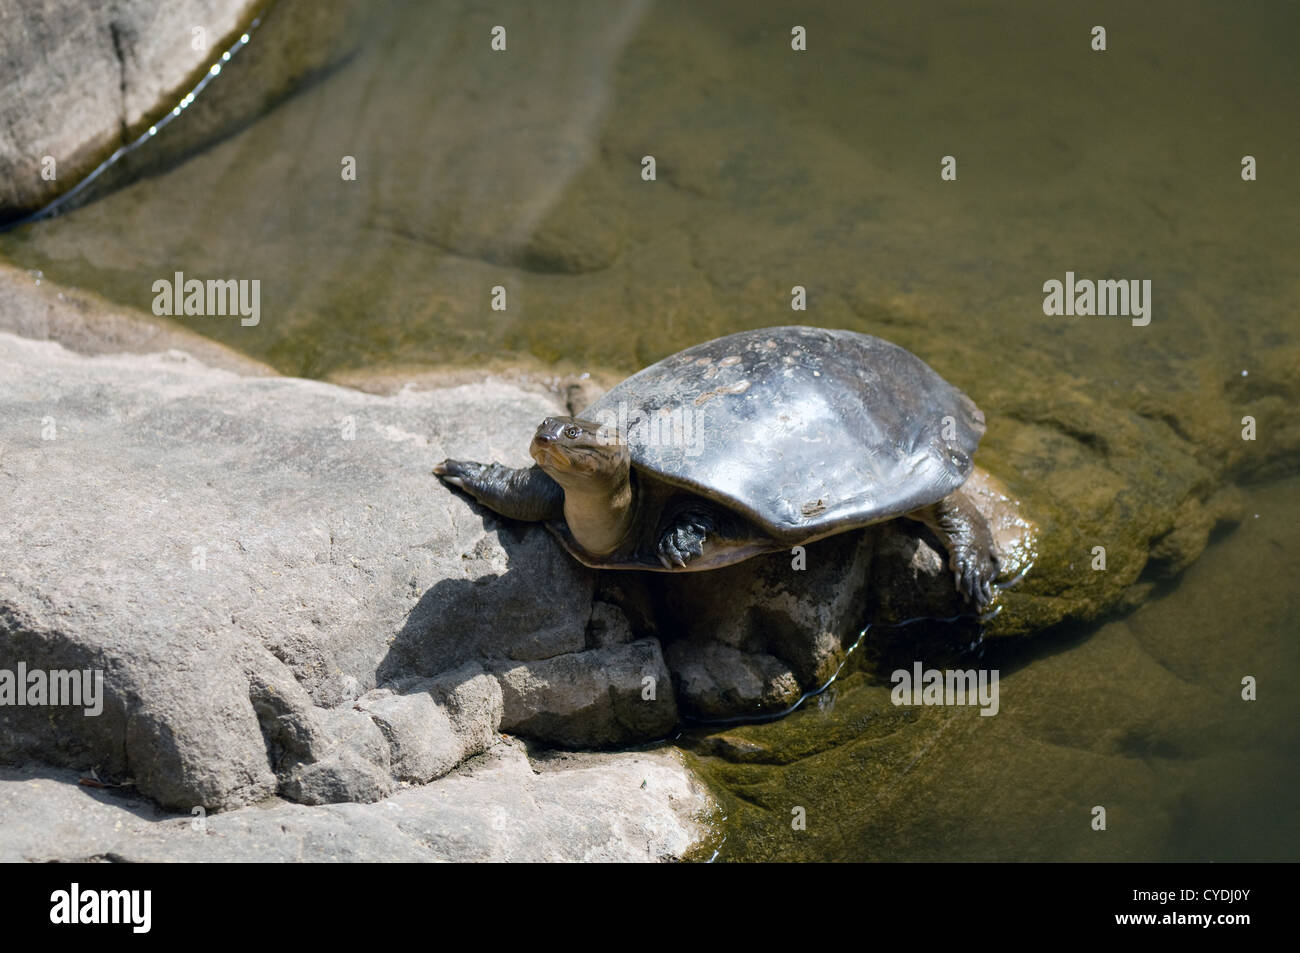 Indian soft-shelled turtle resting on rock Stock Photo